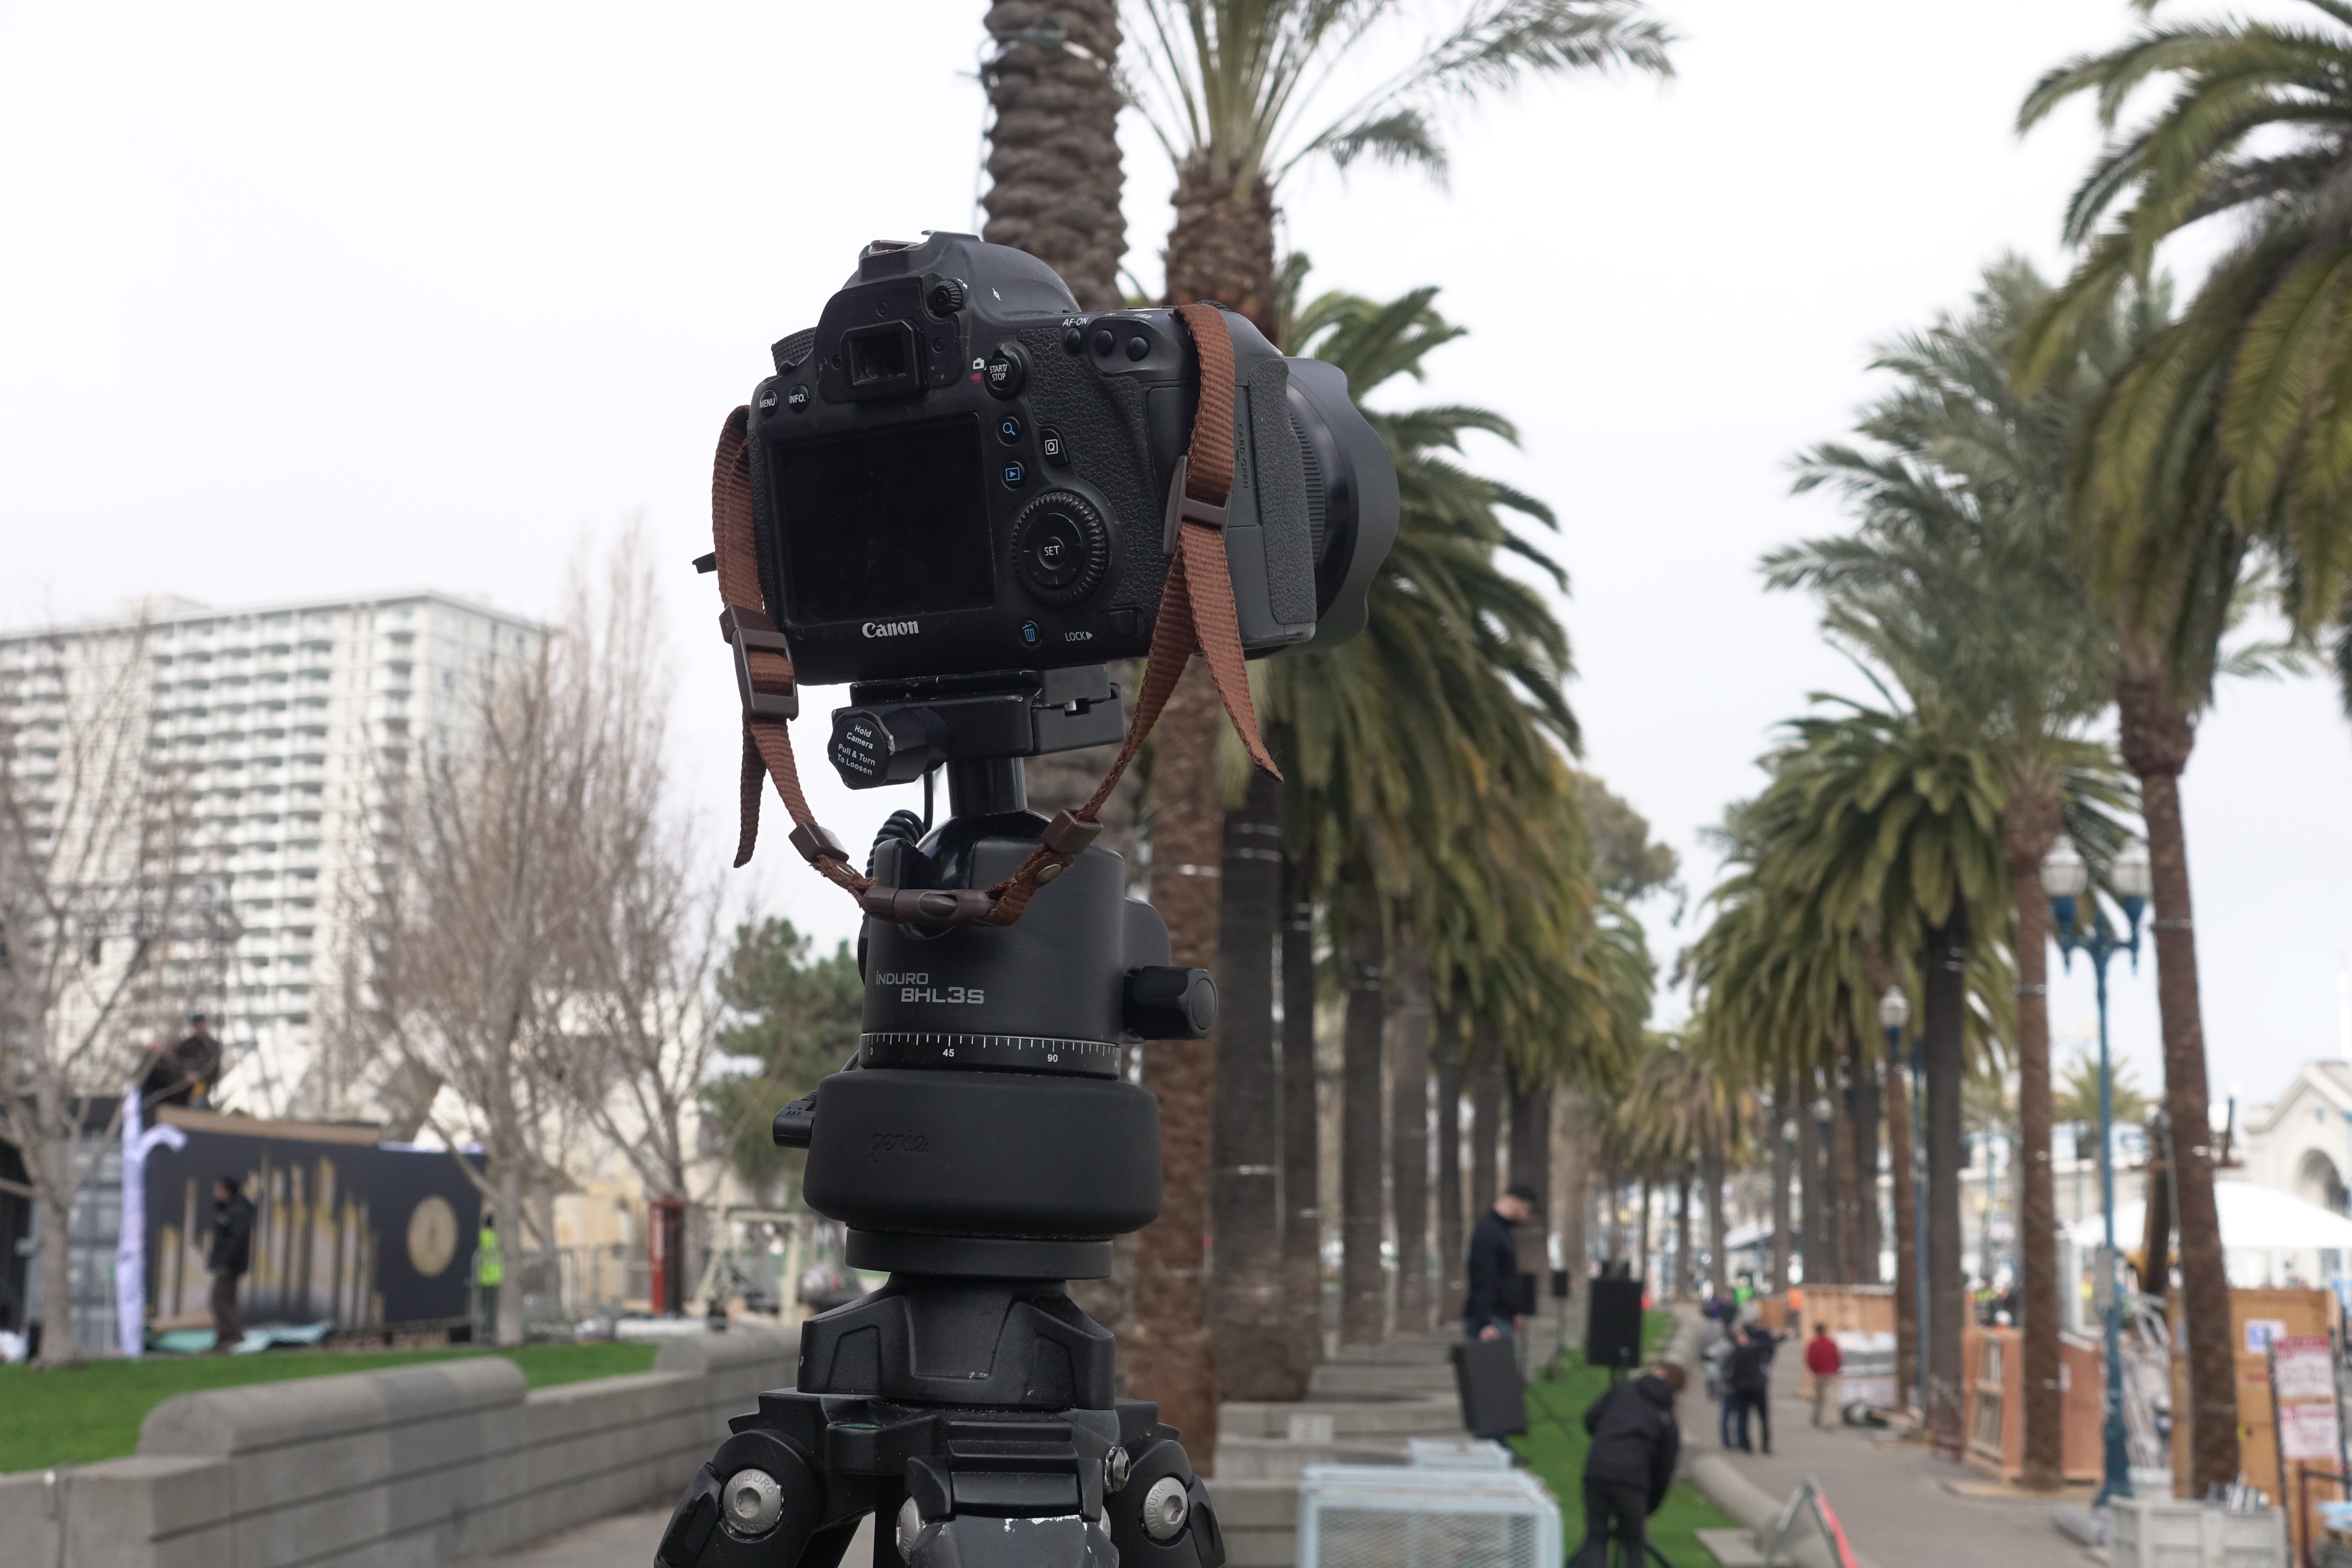 The Syrp Genie Mini is a "Must" For Genie Owners, a "Maybe" For Everyone Else